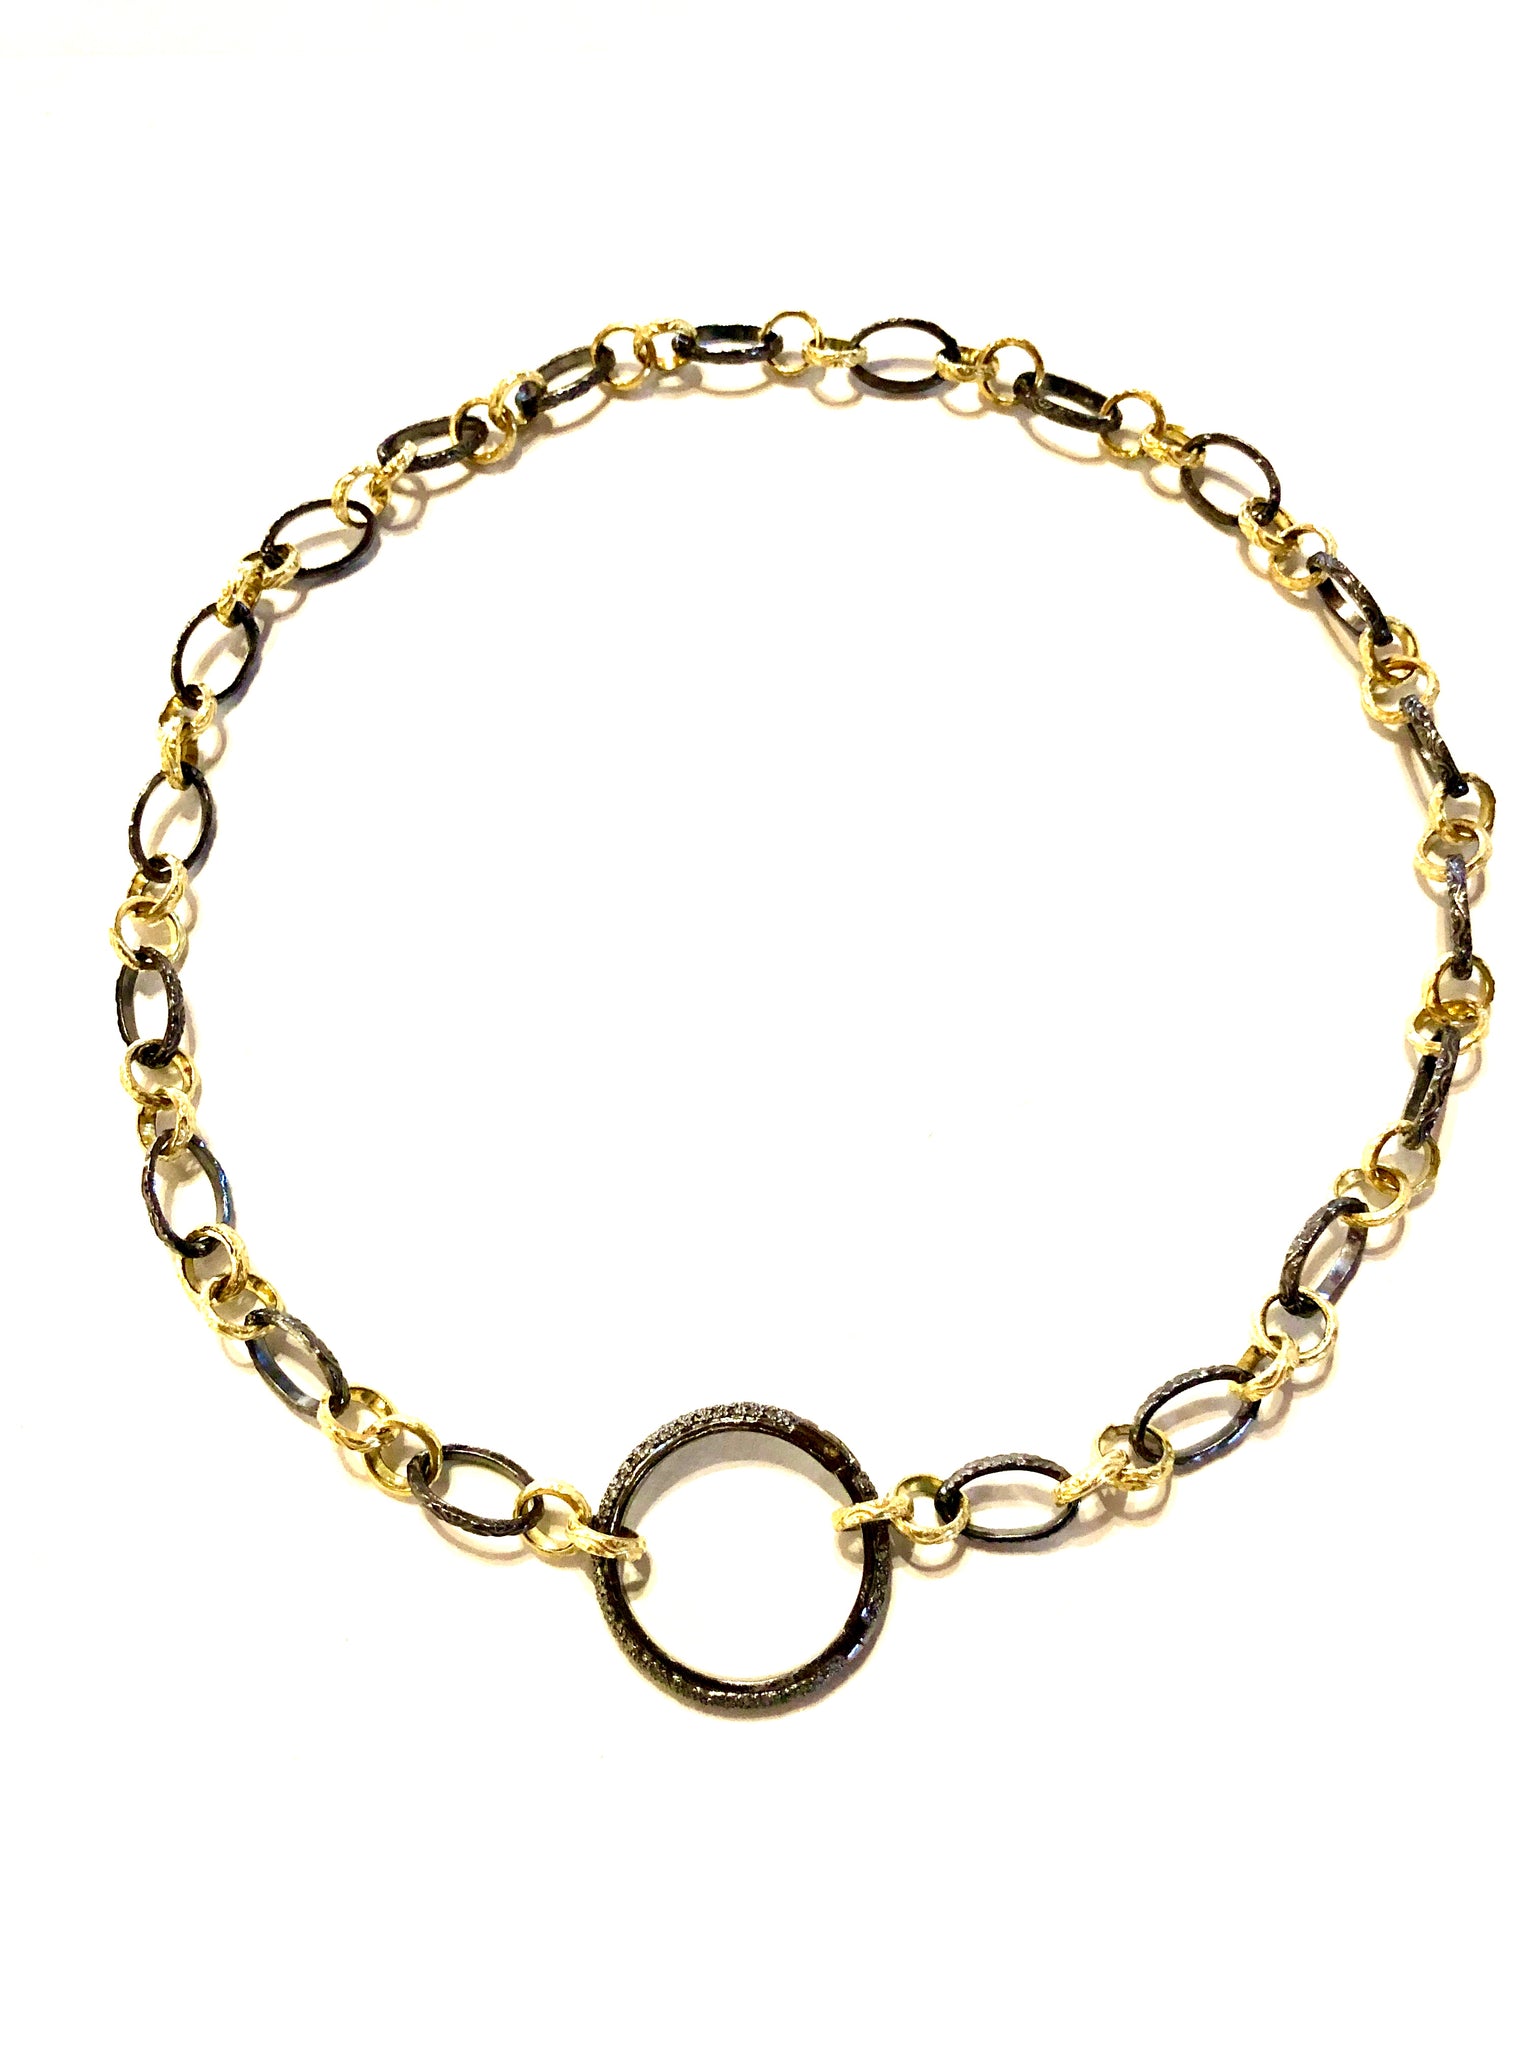 Francie-2 - necklace with handmade sterling silver and vermeil link chain and diamond clasp